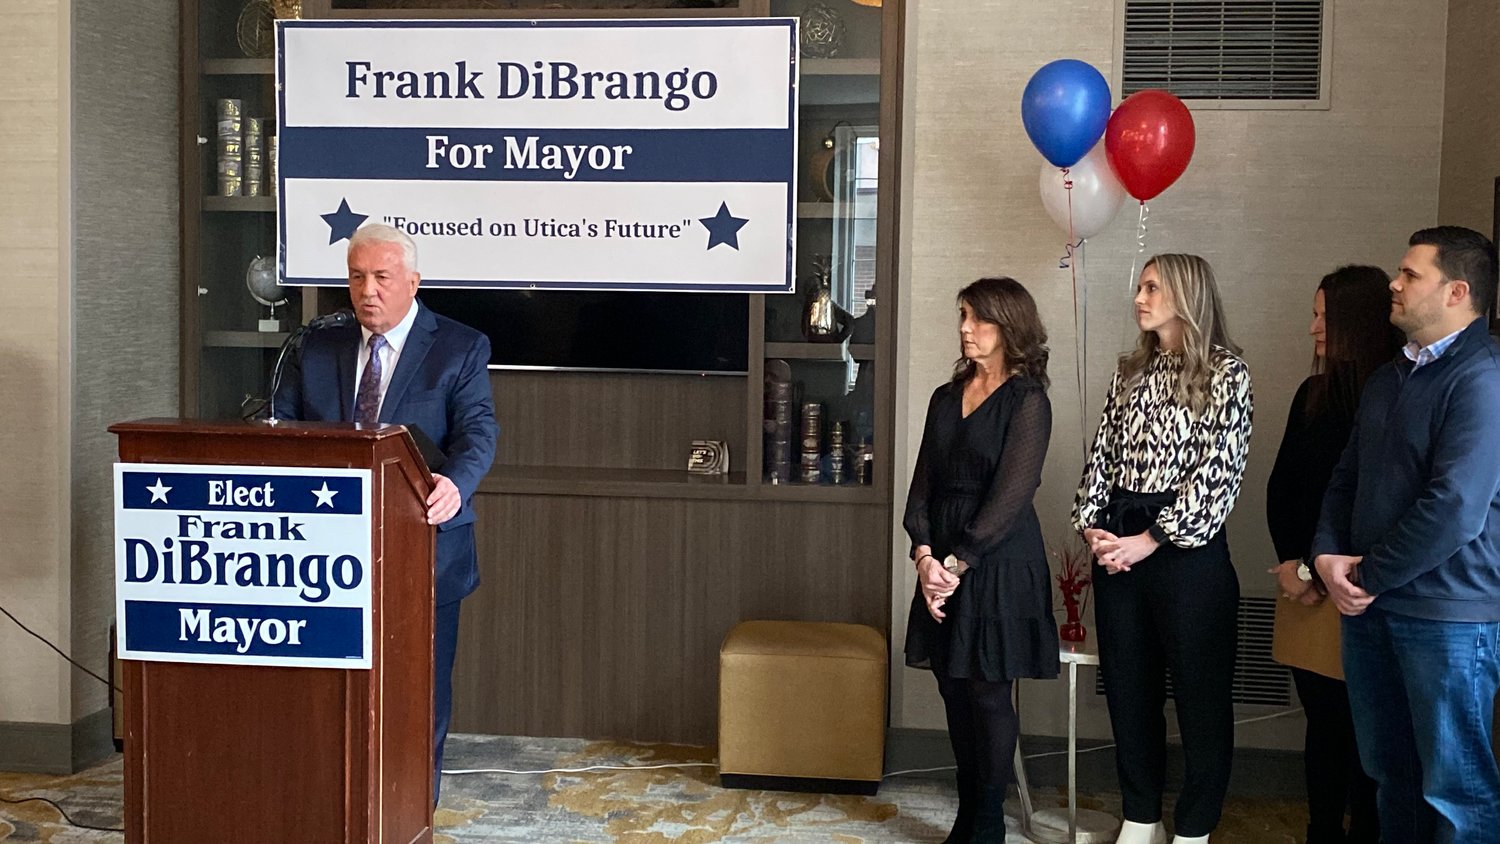 Councilor at Large Frank DiBrango, joined by his family, announced his candidacy for mayor of Utica on Wednesday, Jan. 11 at the DoubleTree by Hilton Utica in downtown Utica.